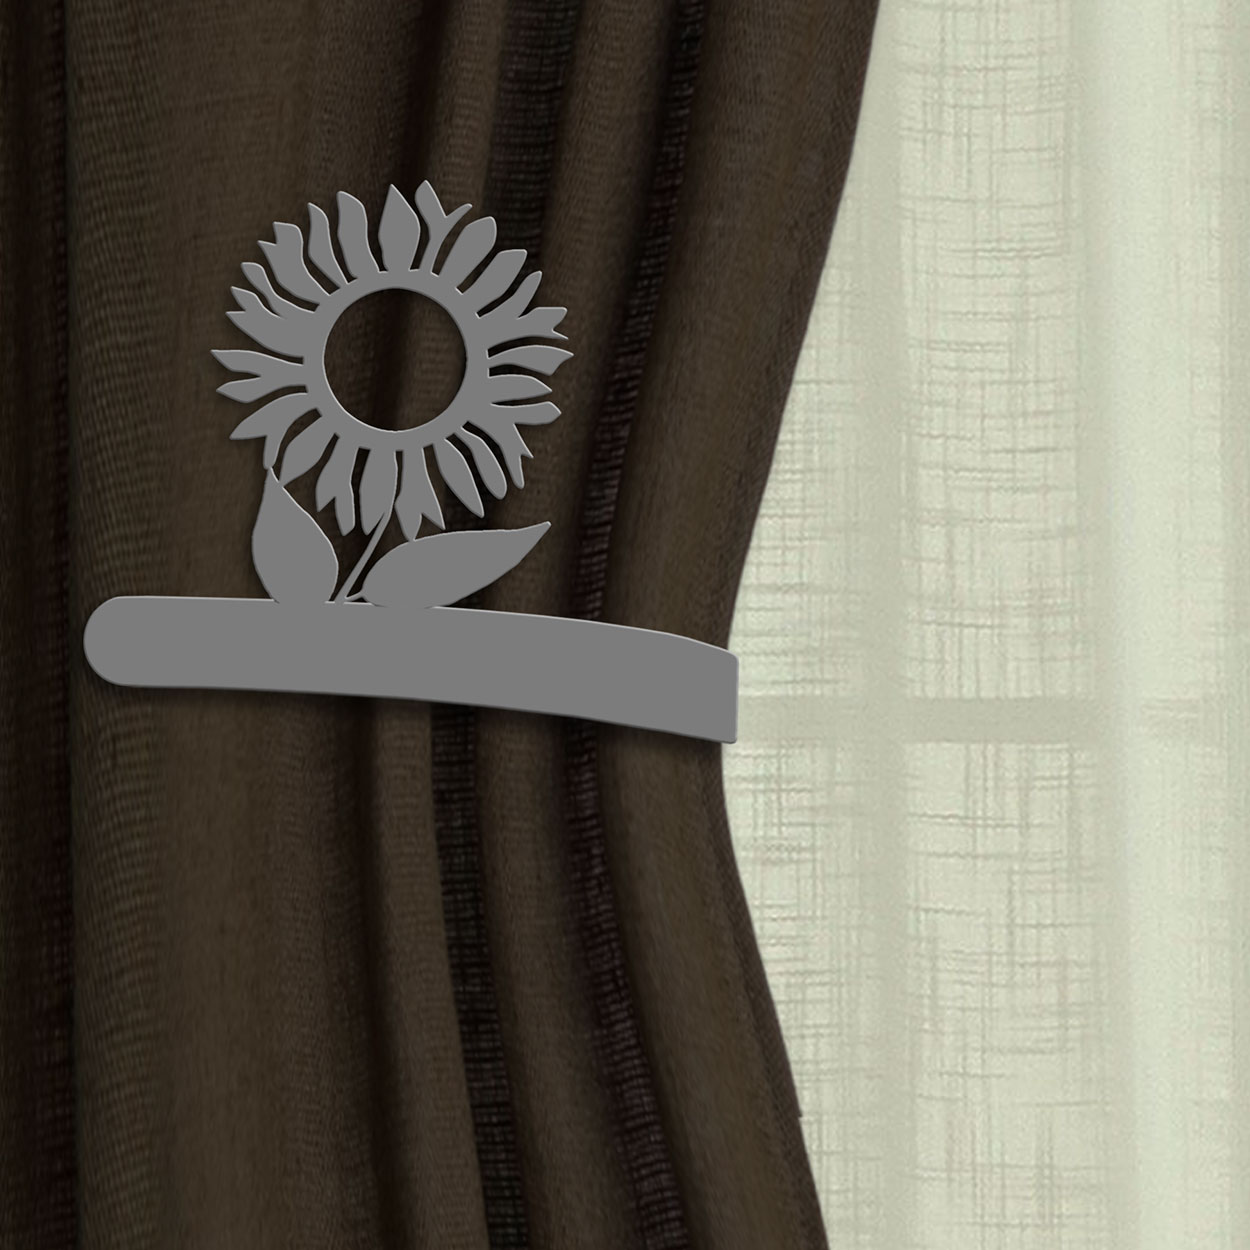 614534 - Drapery Tie Back Hook - Sunflower - Choose L or R and Color